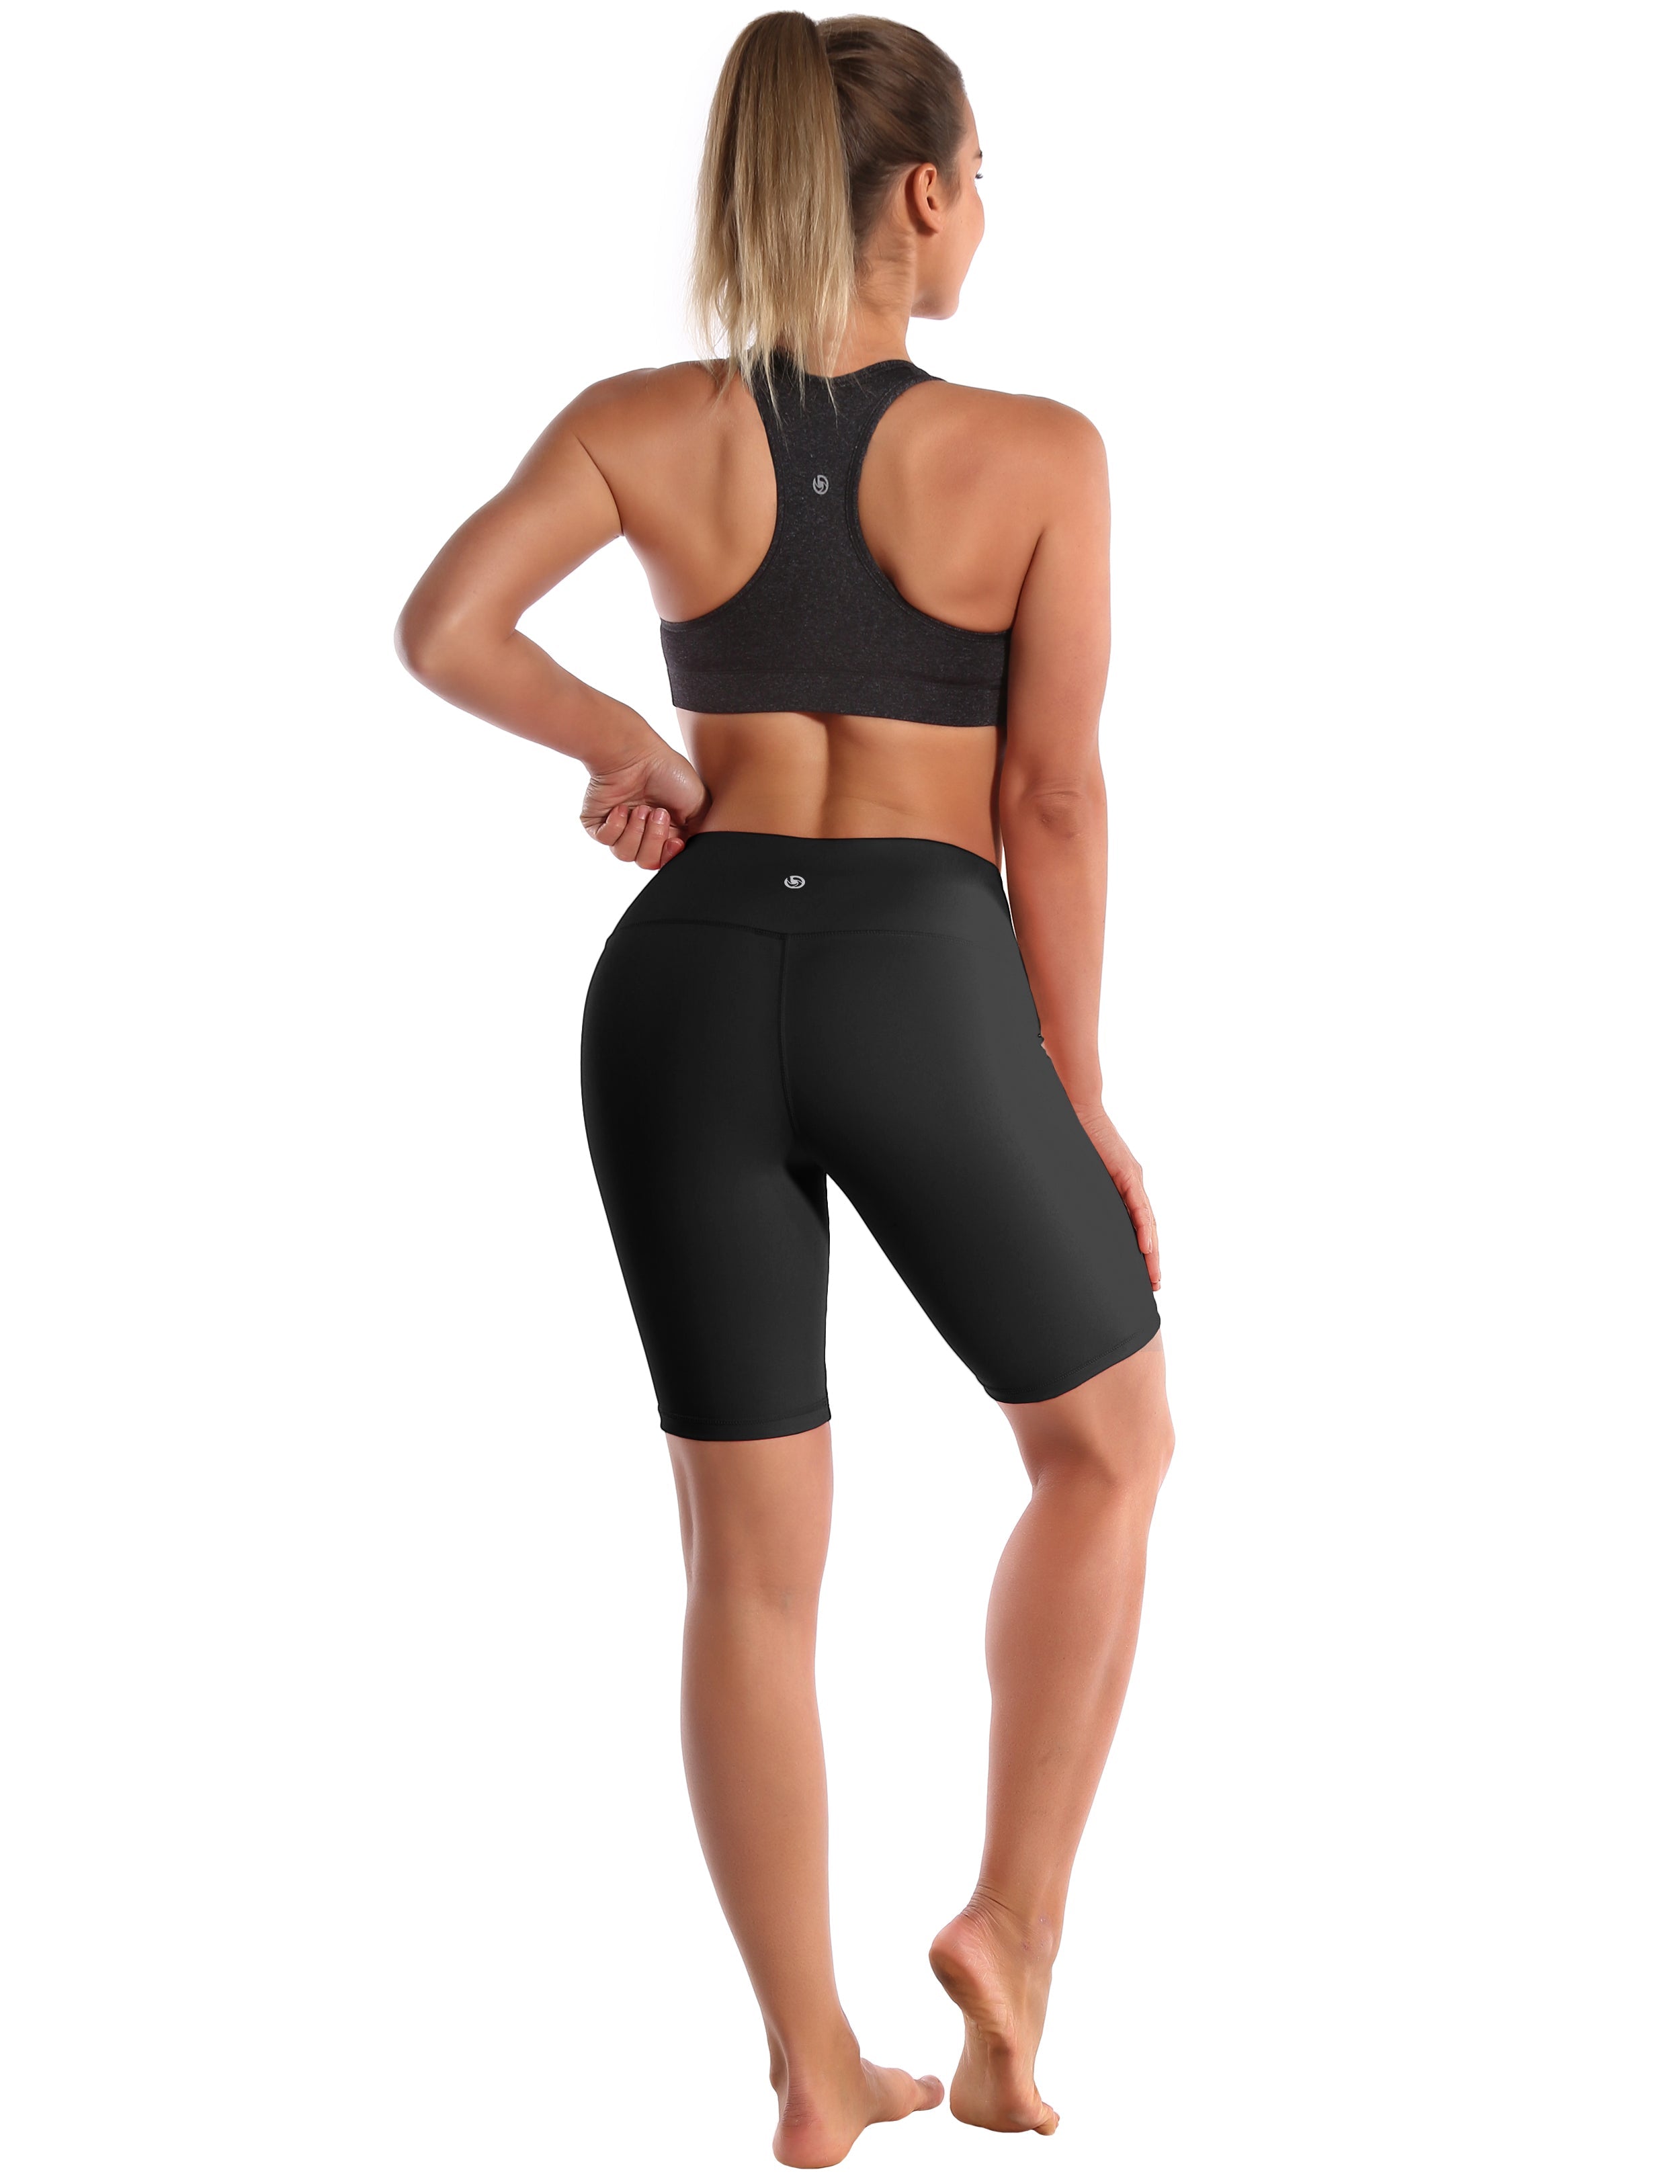 8" High Waist Yoga Shorts black Sleek, soft, smooth and totally comfortable: our newest style is here. Softest-ever fabric High elasticity High density 4-way stretch Fabric doesn't attract lint easily No see-through Moisture-wicking Machine wash 75% Nylon, 25% Spandex